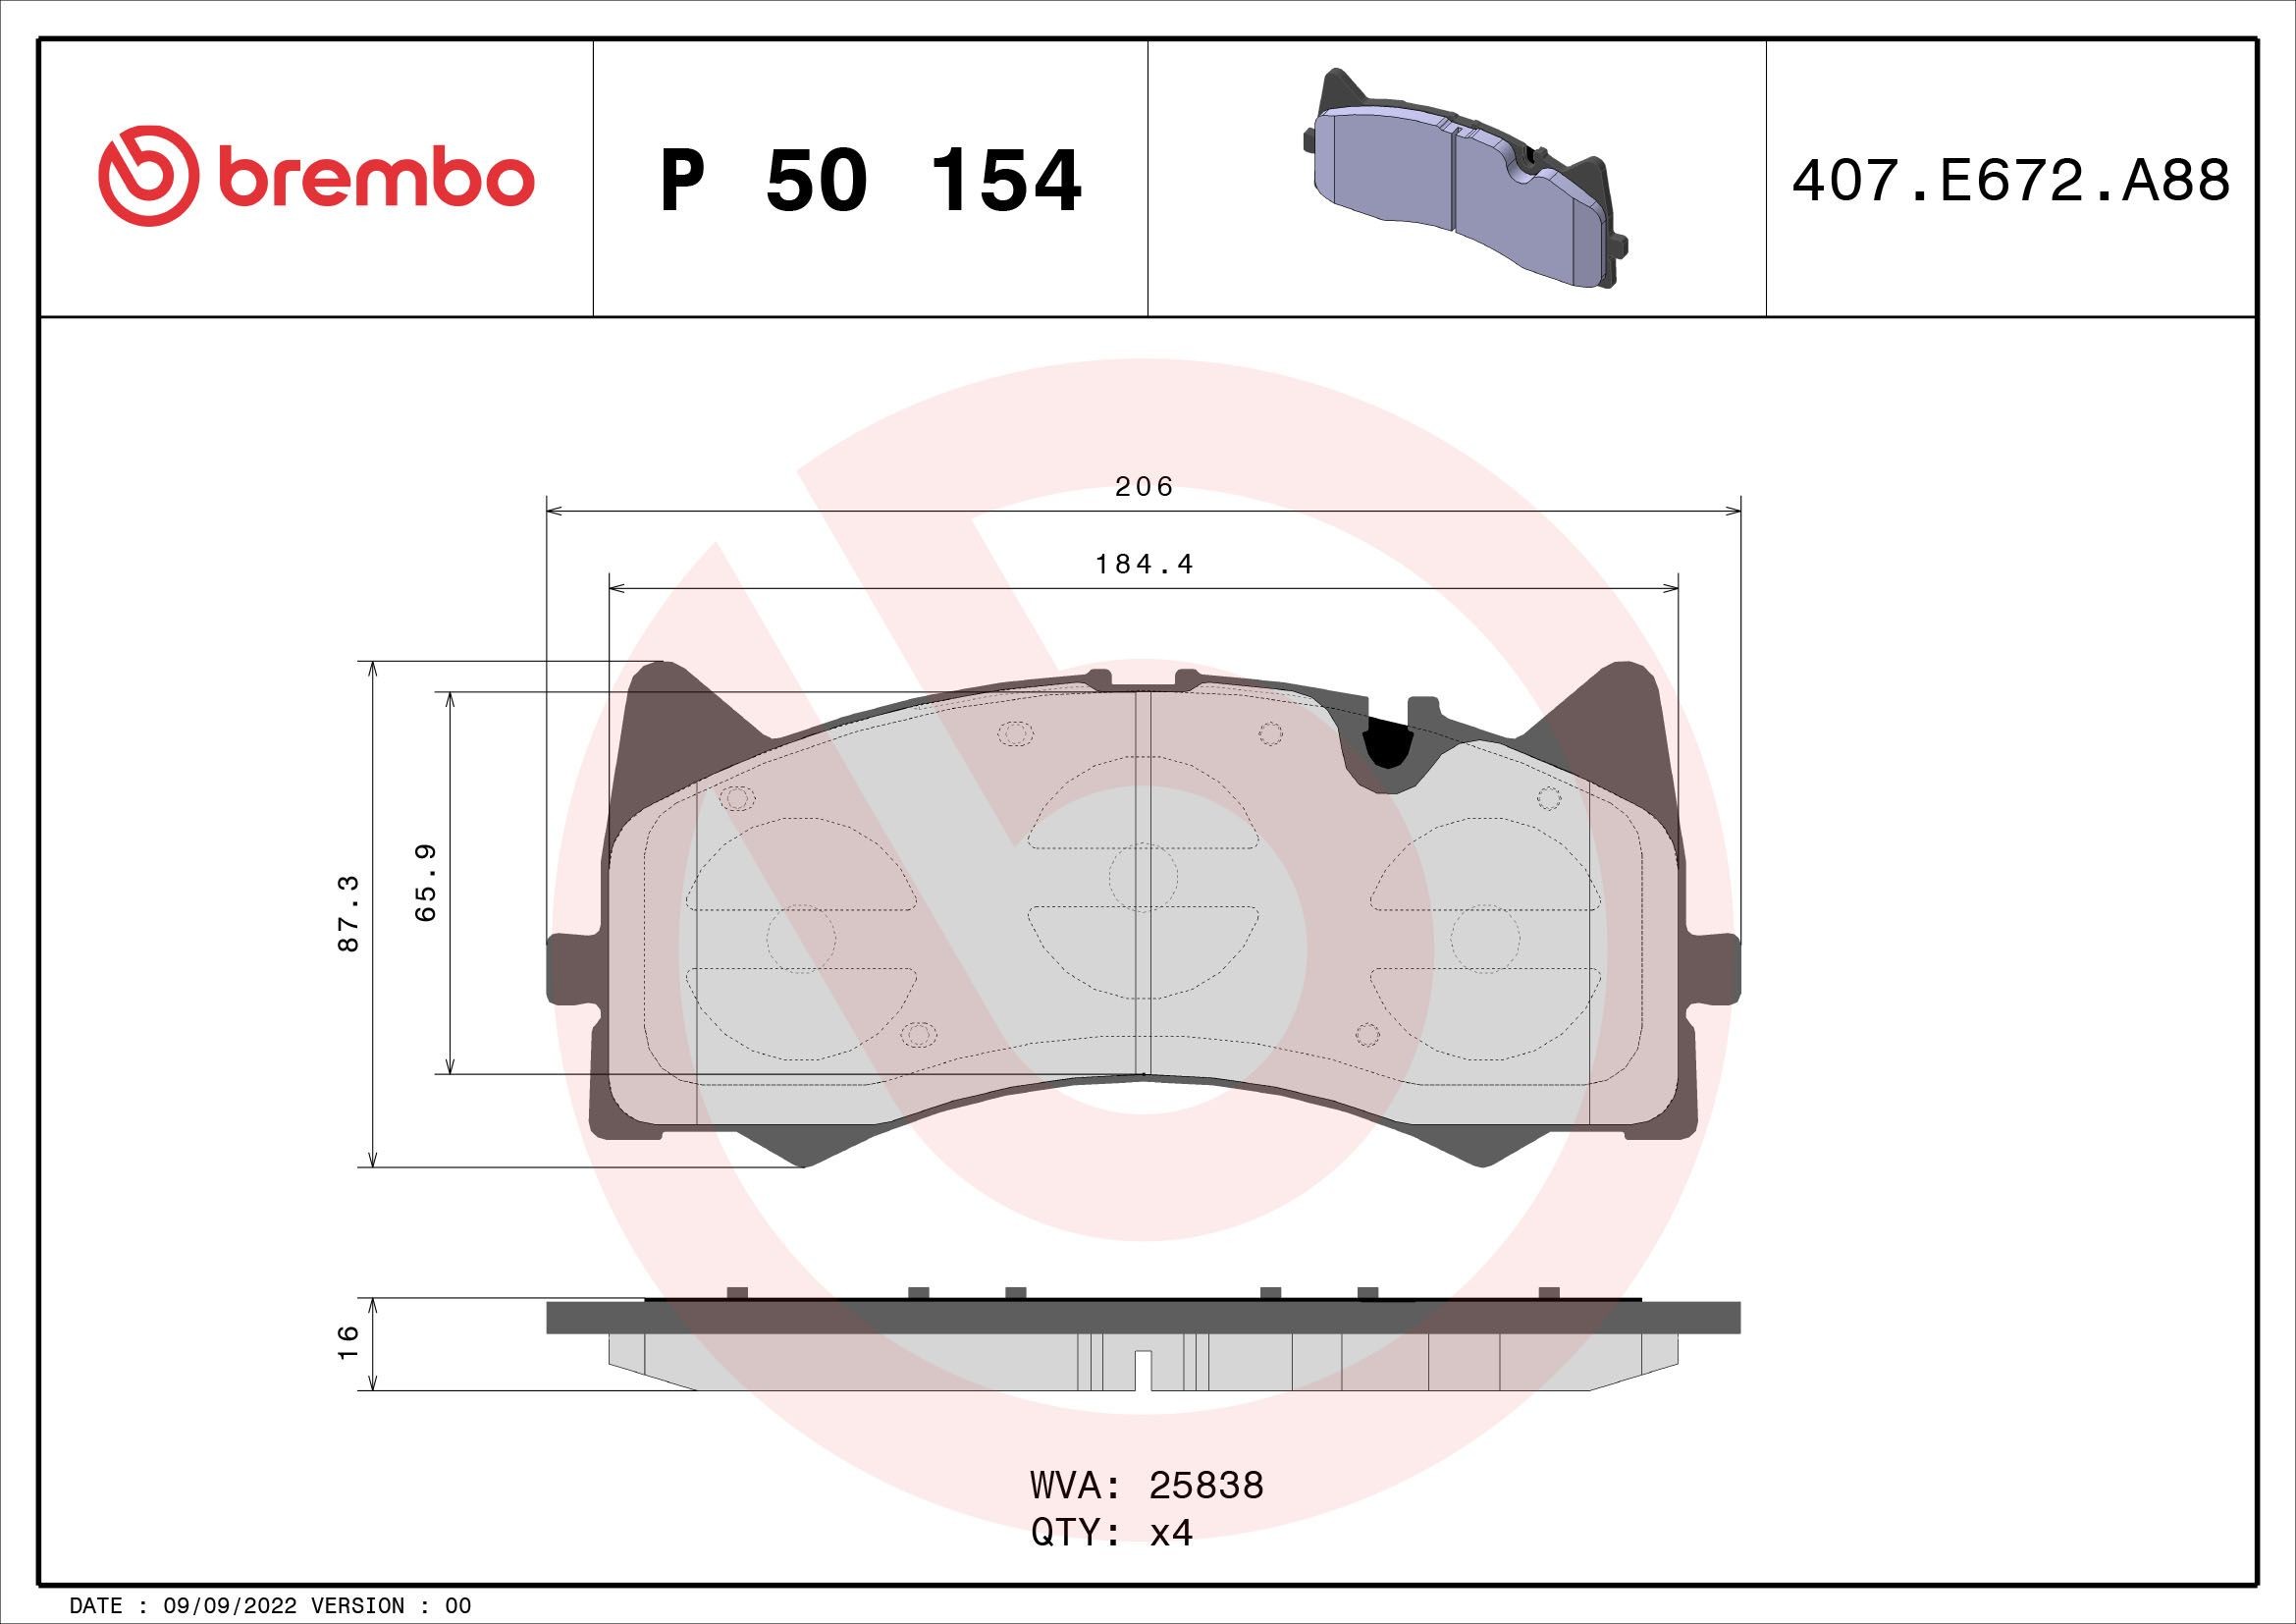 BREMBO prepared for wear indicator, with anti-squeak plate, with accessories Height: 87mm, Width: 206mm, Thickness: 16mm Brake pads P 50 154 buy